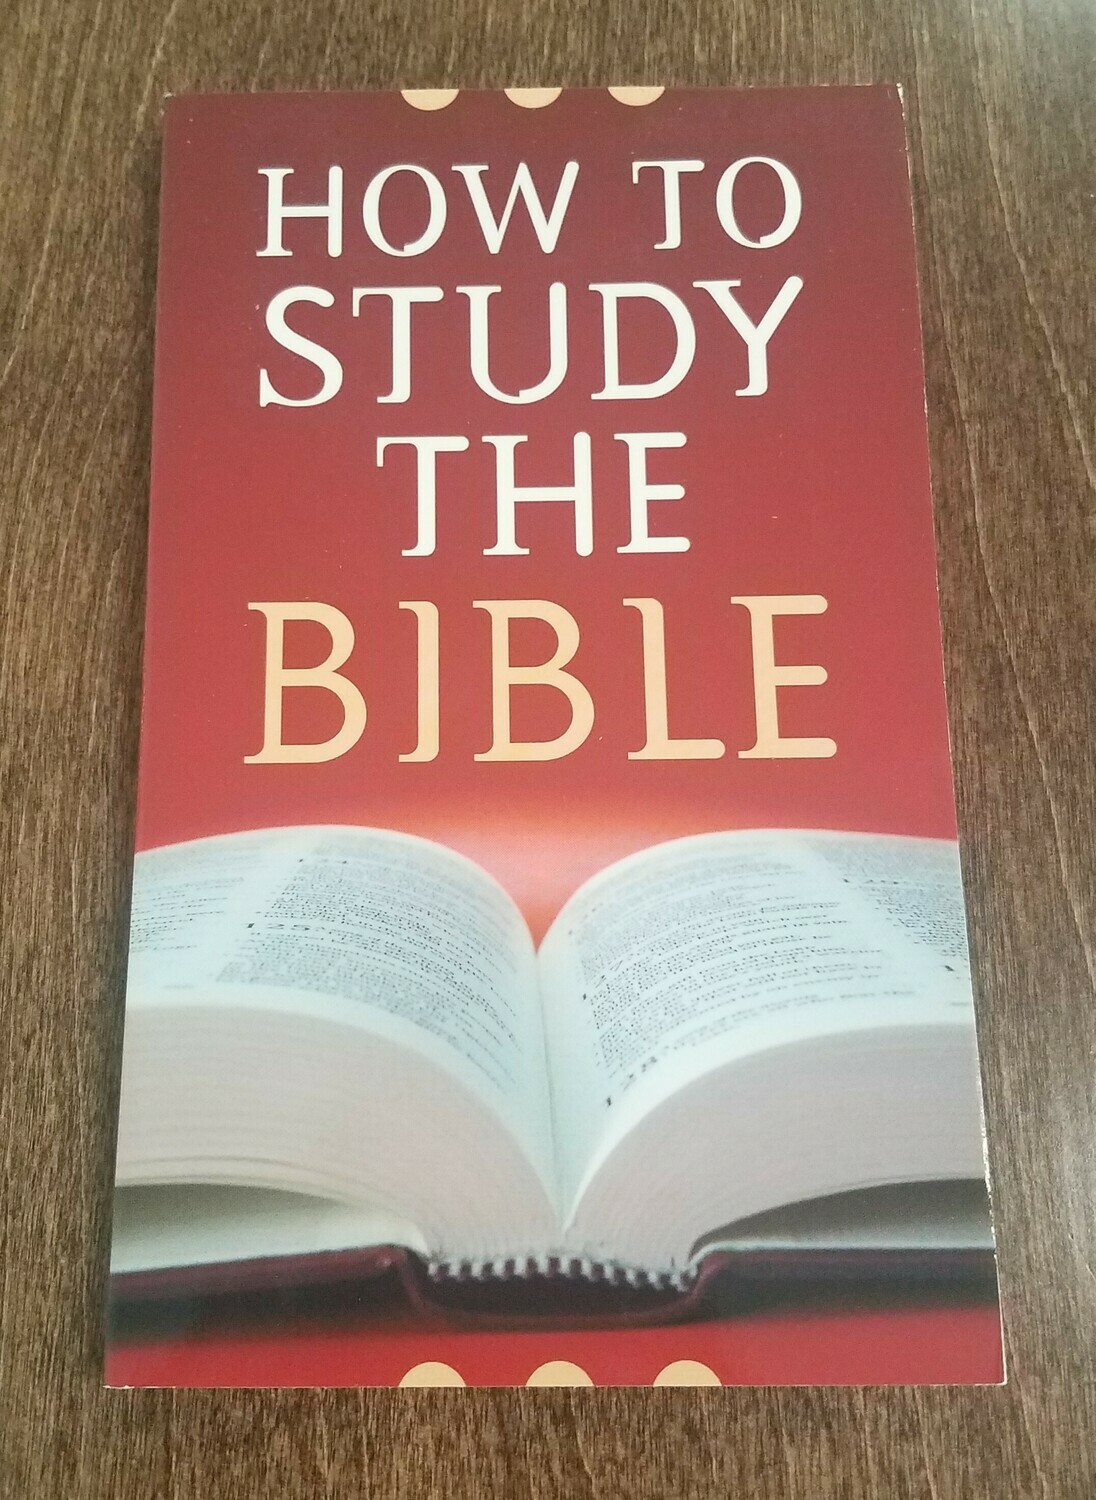 How to Study the Bible by Robert M. West